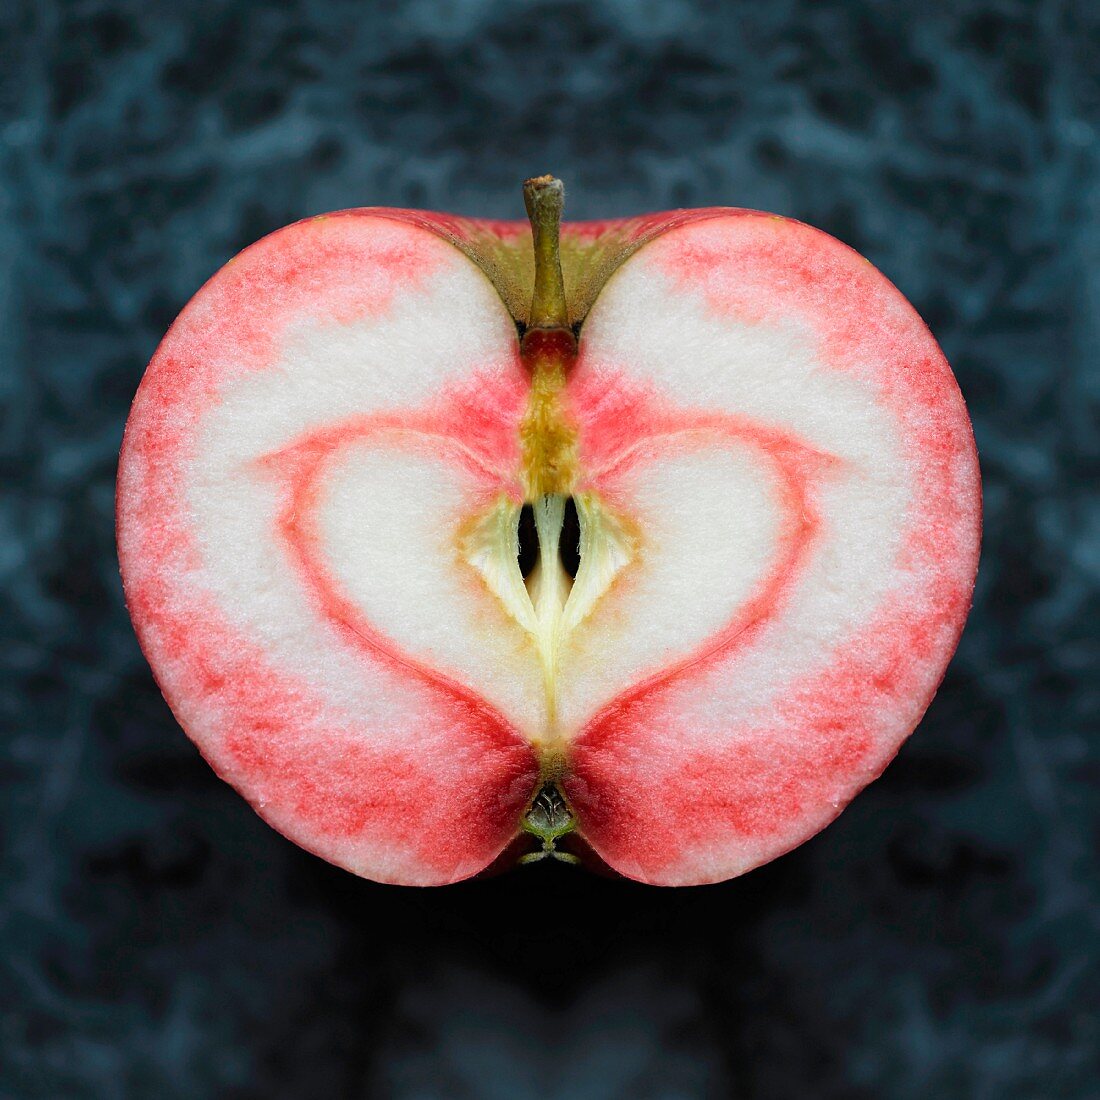 Half an apple with a heart-shaped in the flesh